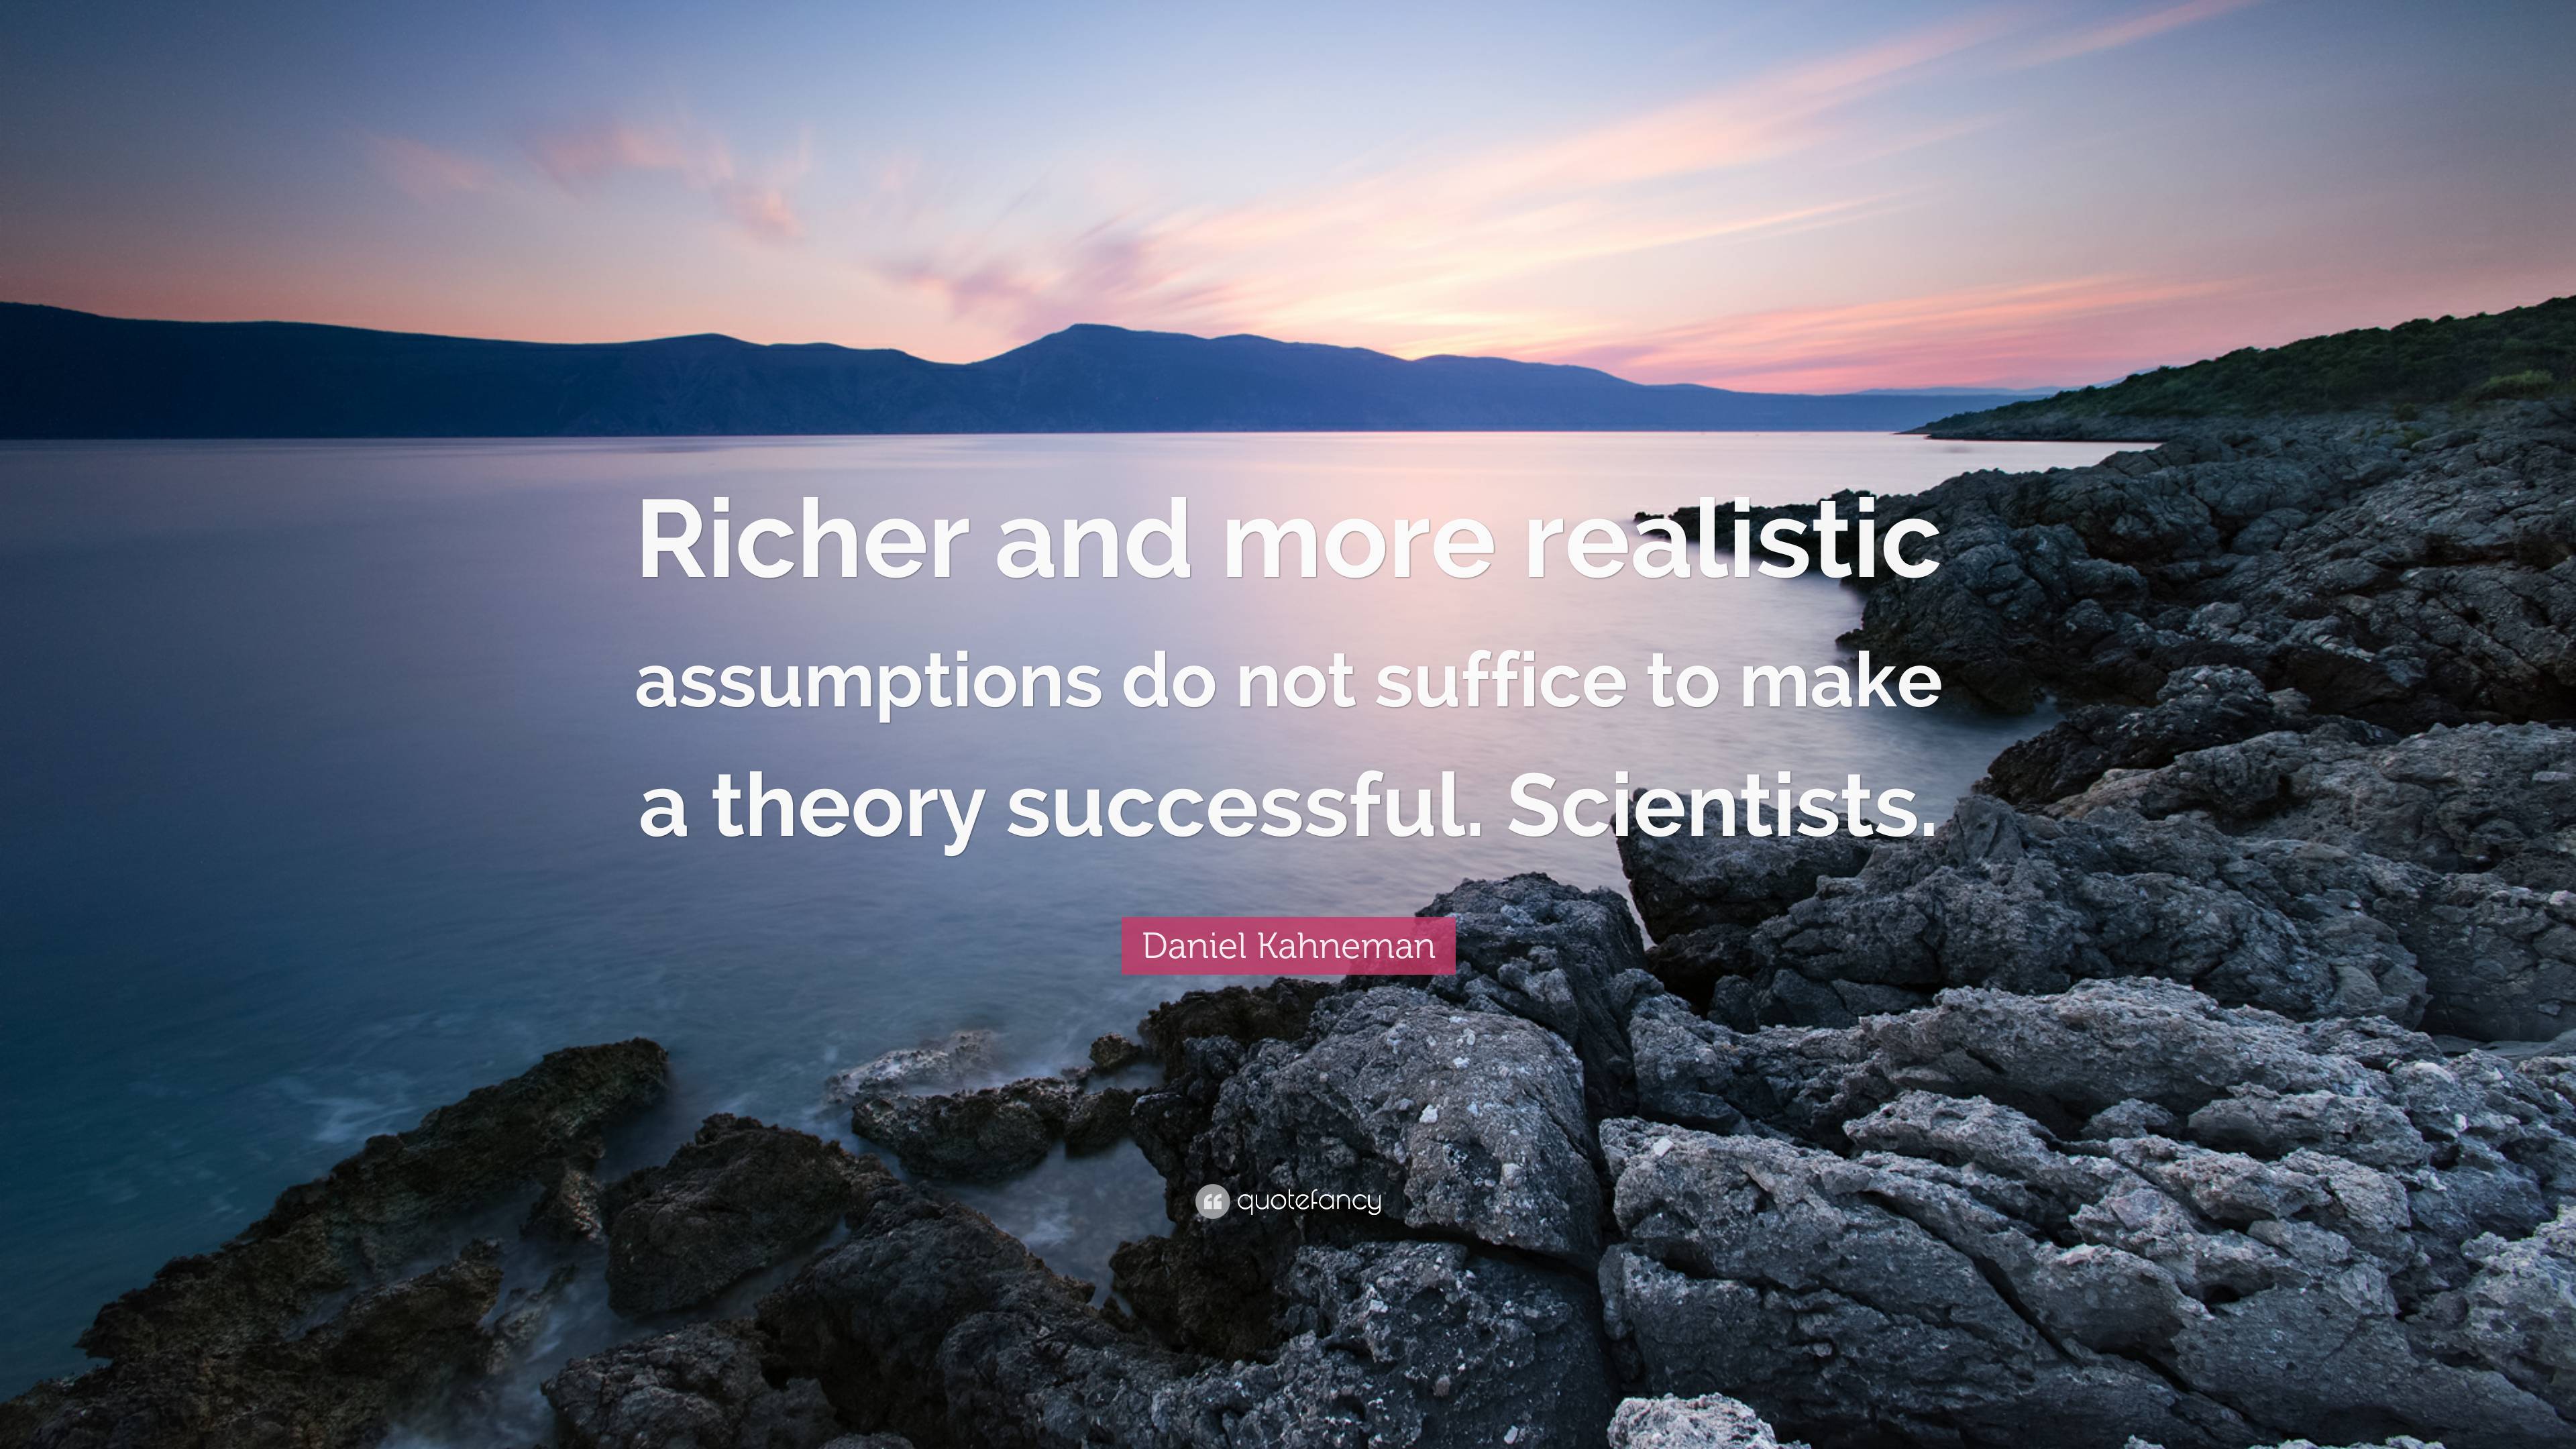 Daniel Kahneman Quote “richer And More Realistic Assumptions Do Not Suffice To Make A Theory